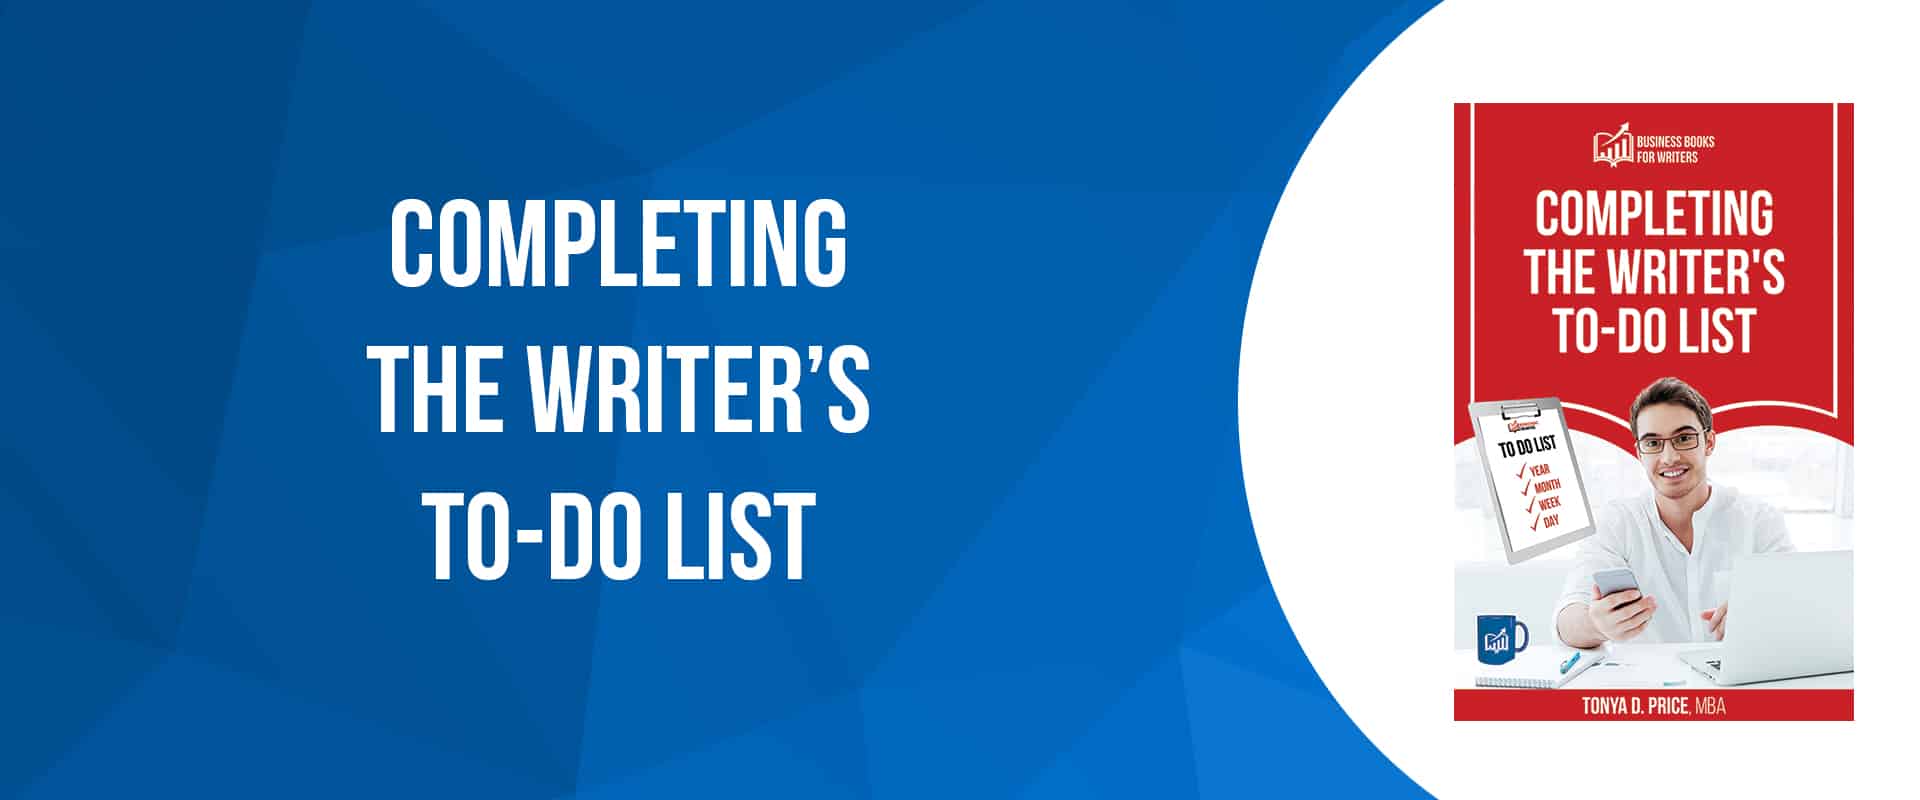 Completing the Writer's To-Do List cover image